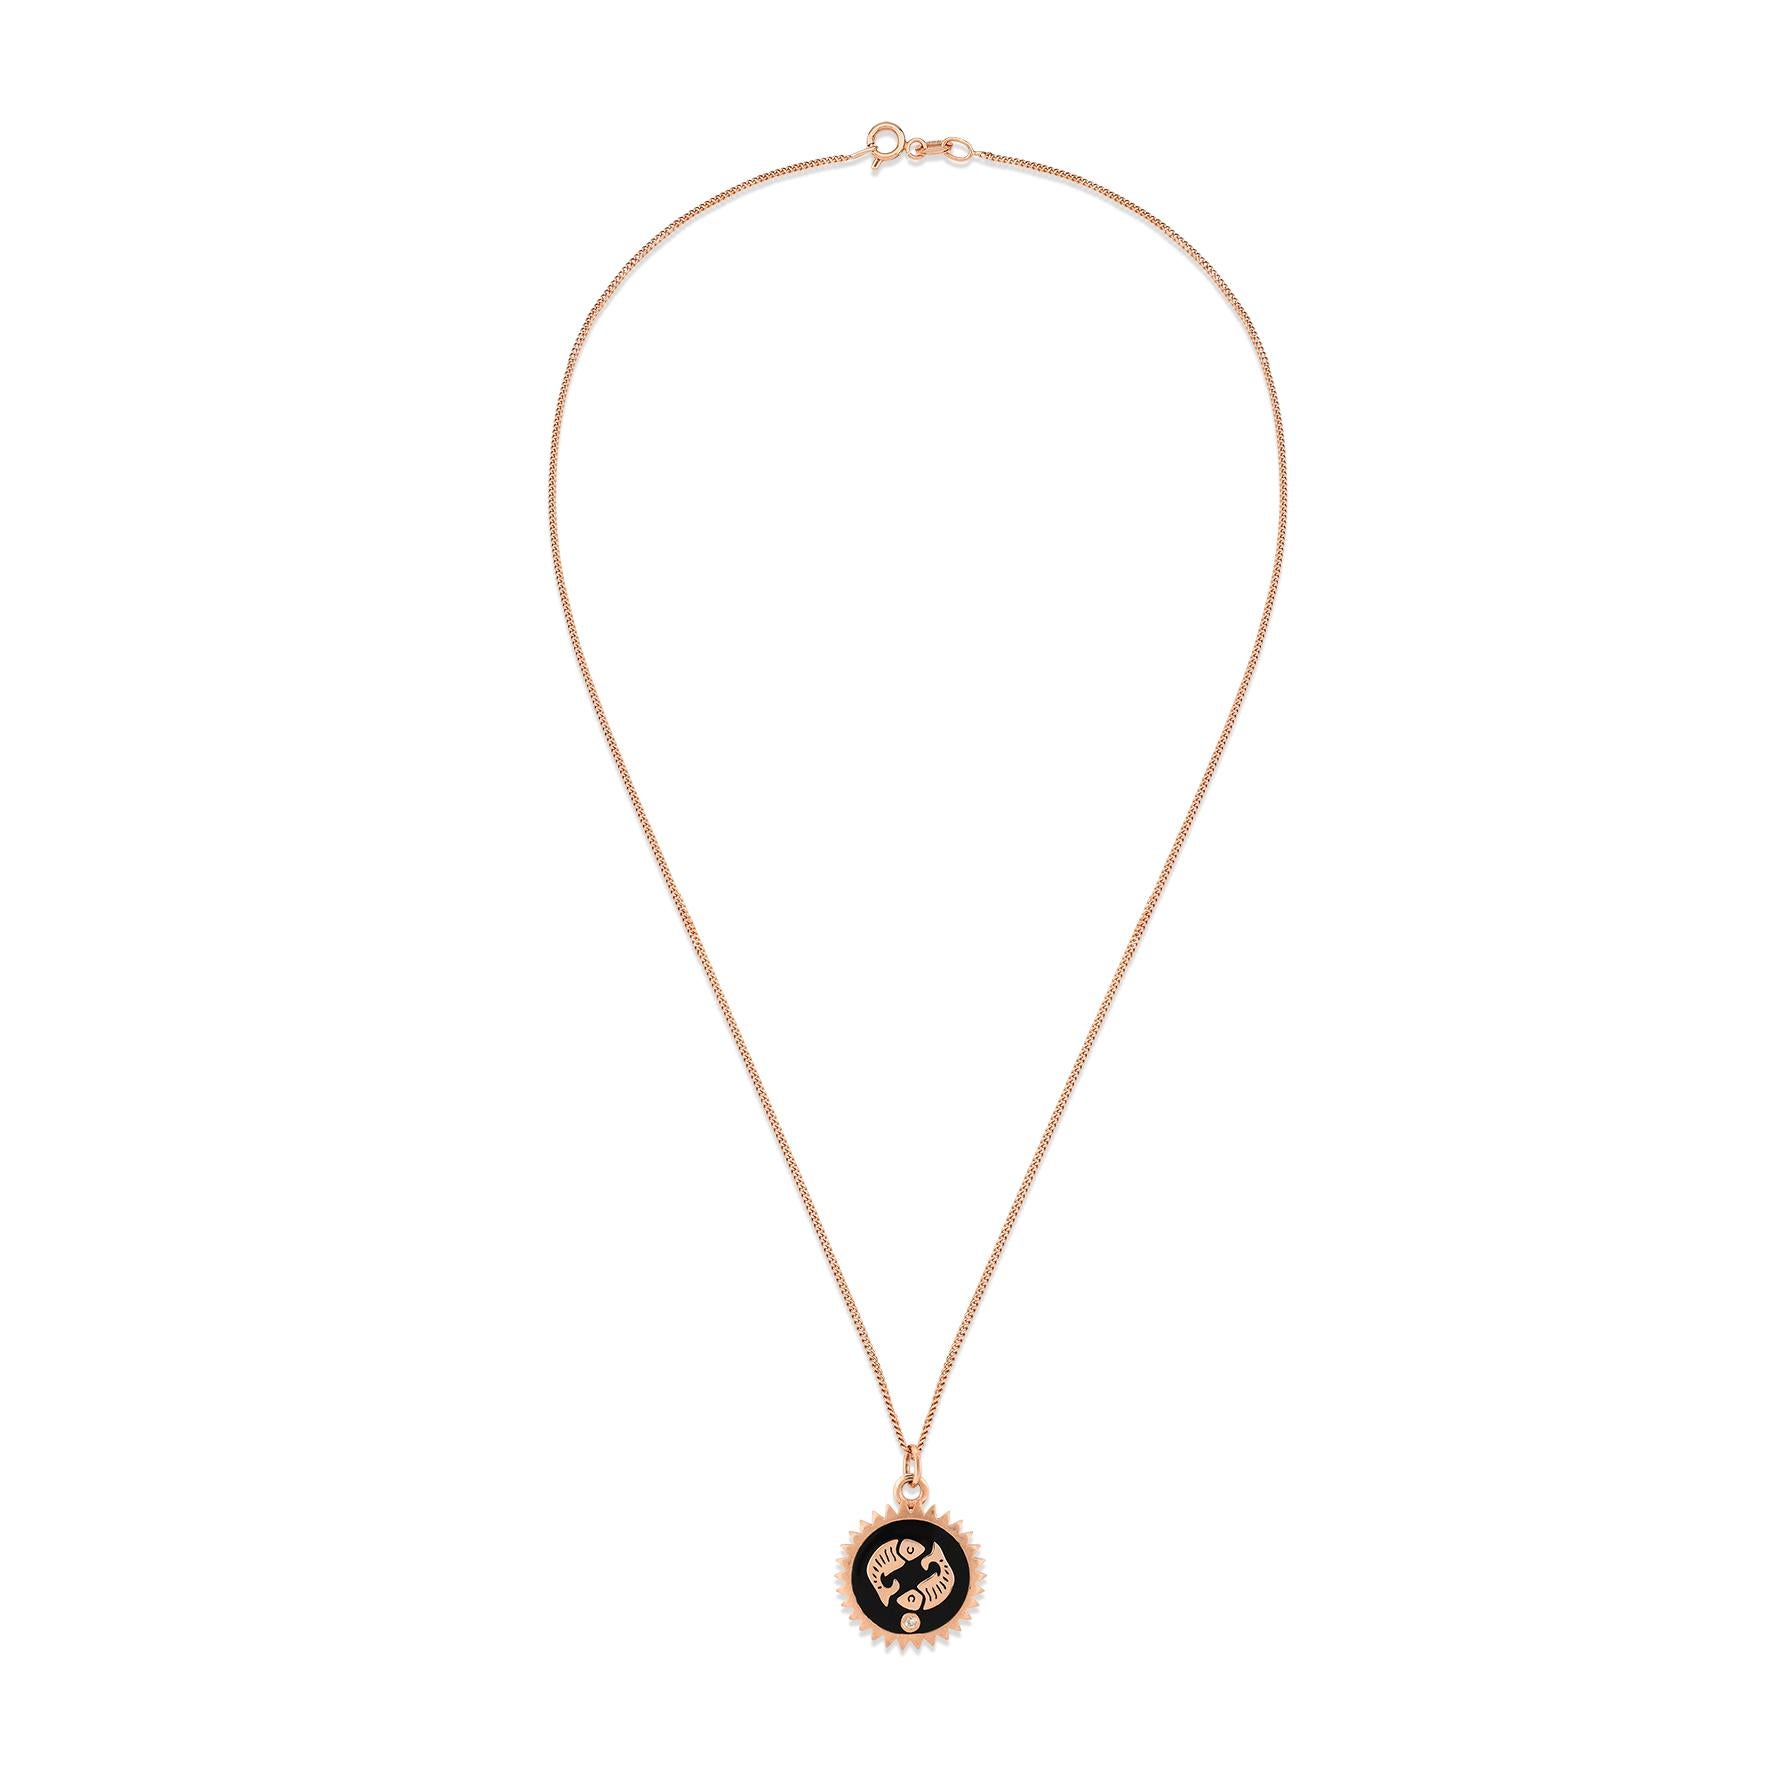 Pisces necklace in 14k rose gold with black enamel & white diamond

Additional Information:-
Collection: Zodiac collection
14K Rose gold
0.01ct White diamond
Pendant height 1cm
Chain length 40cm